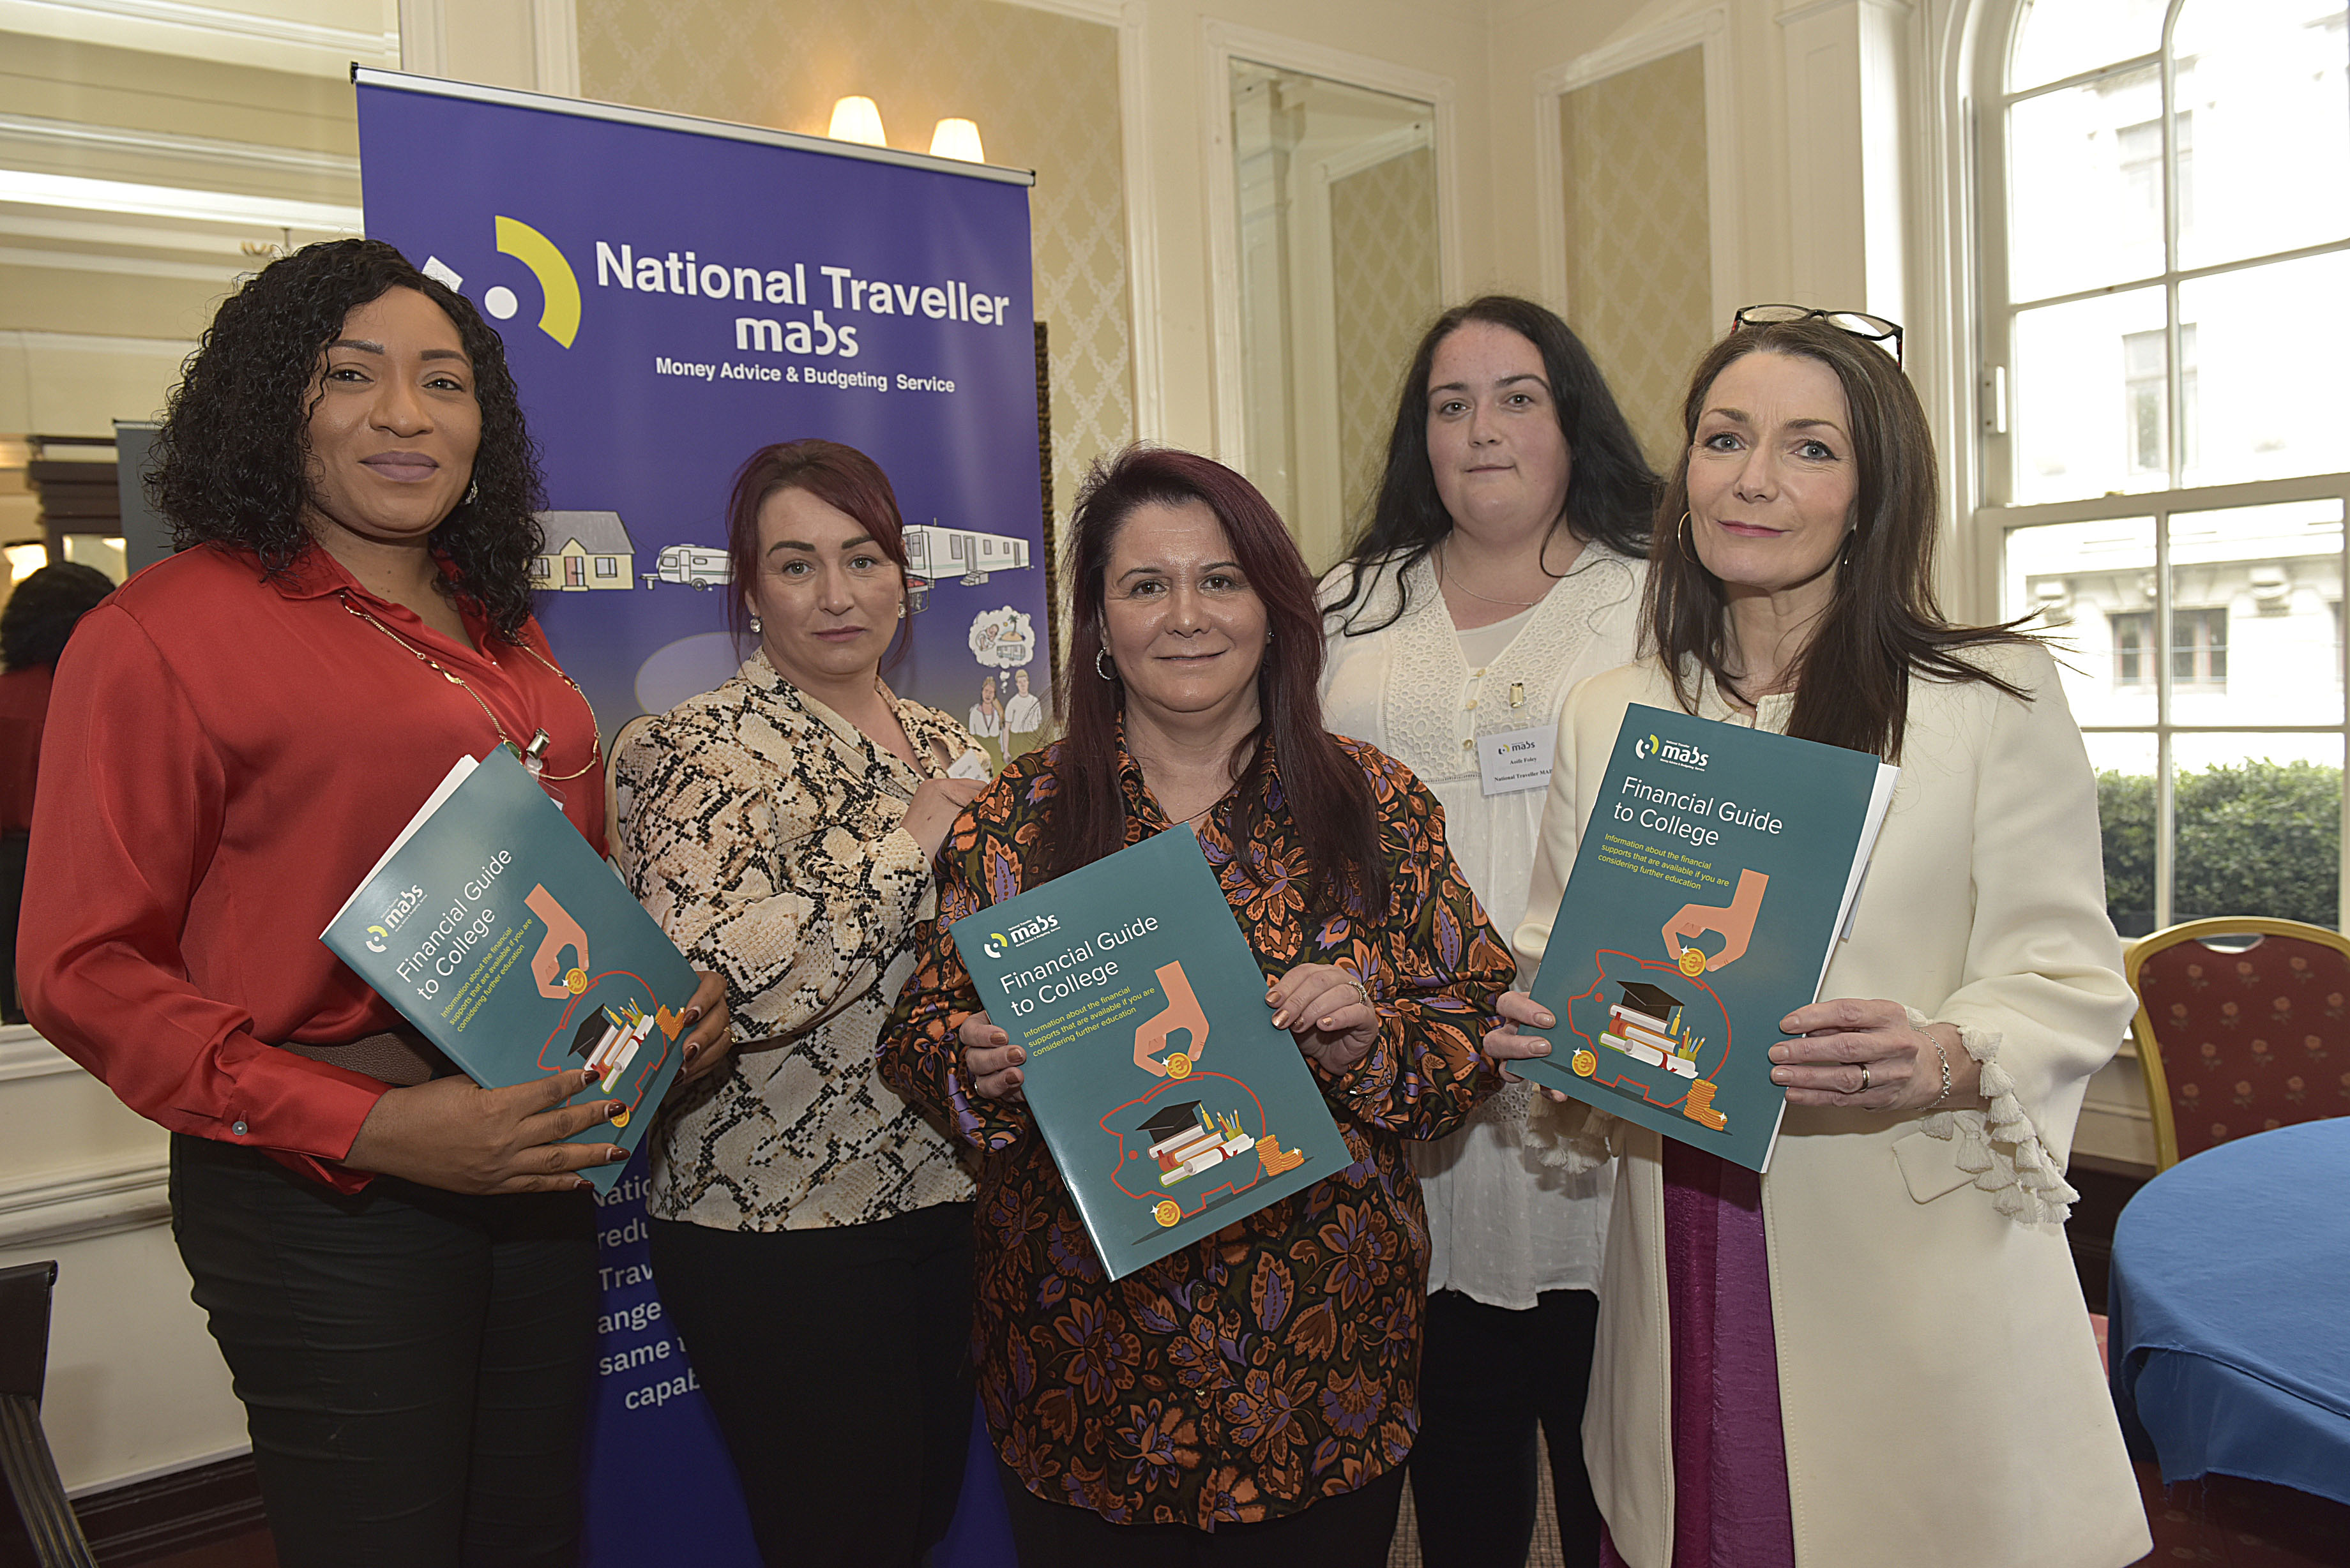 Launch of National Traveller MABS’ Financial Guide to College